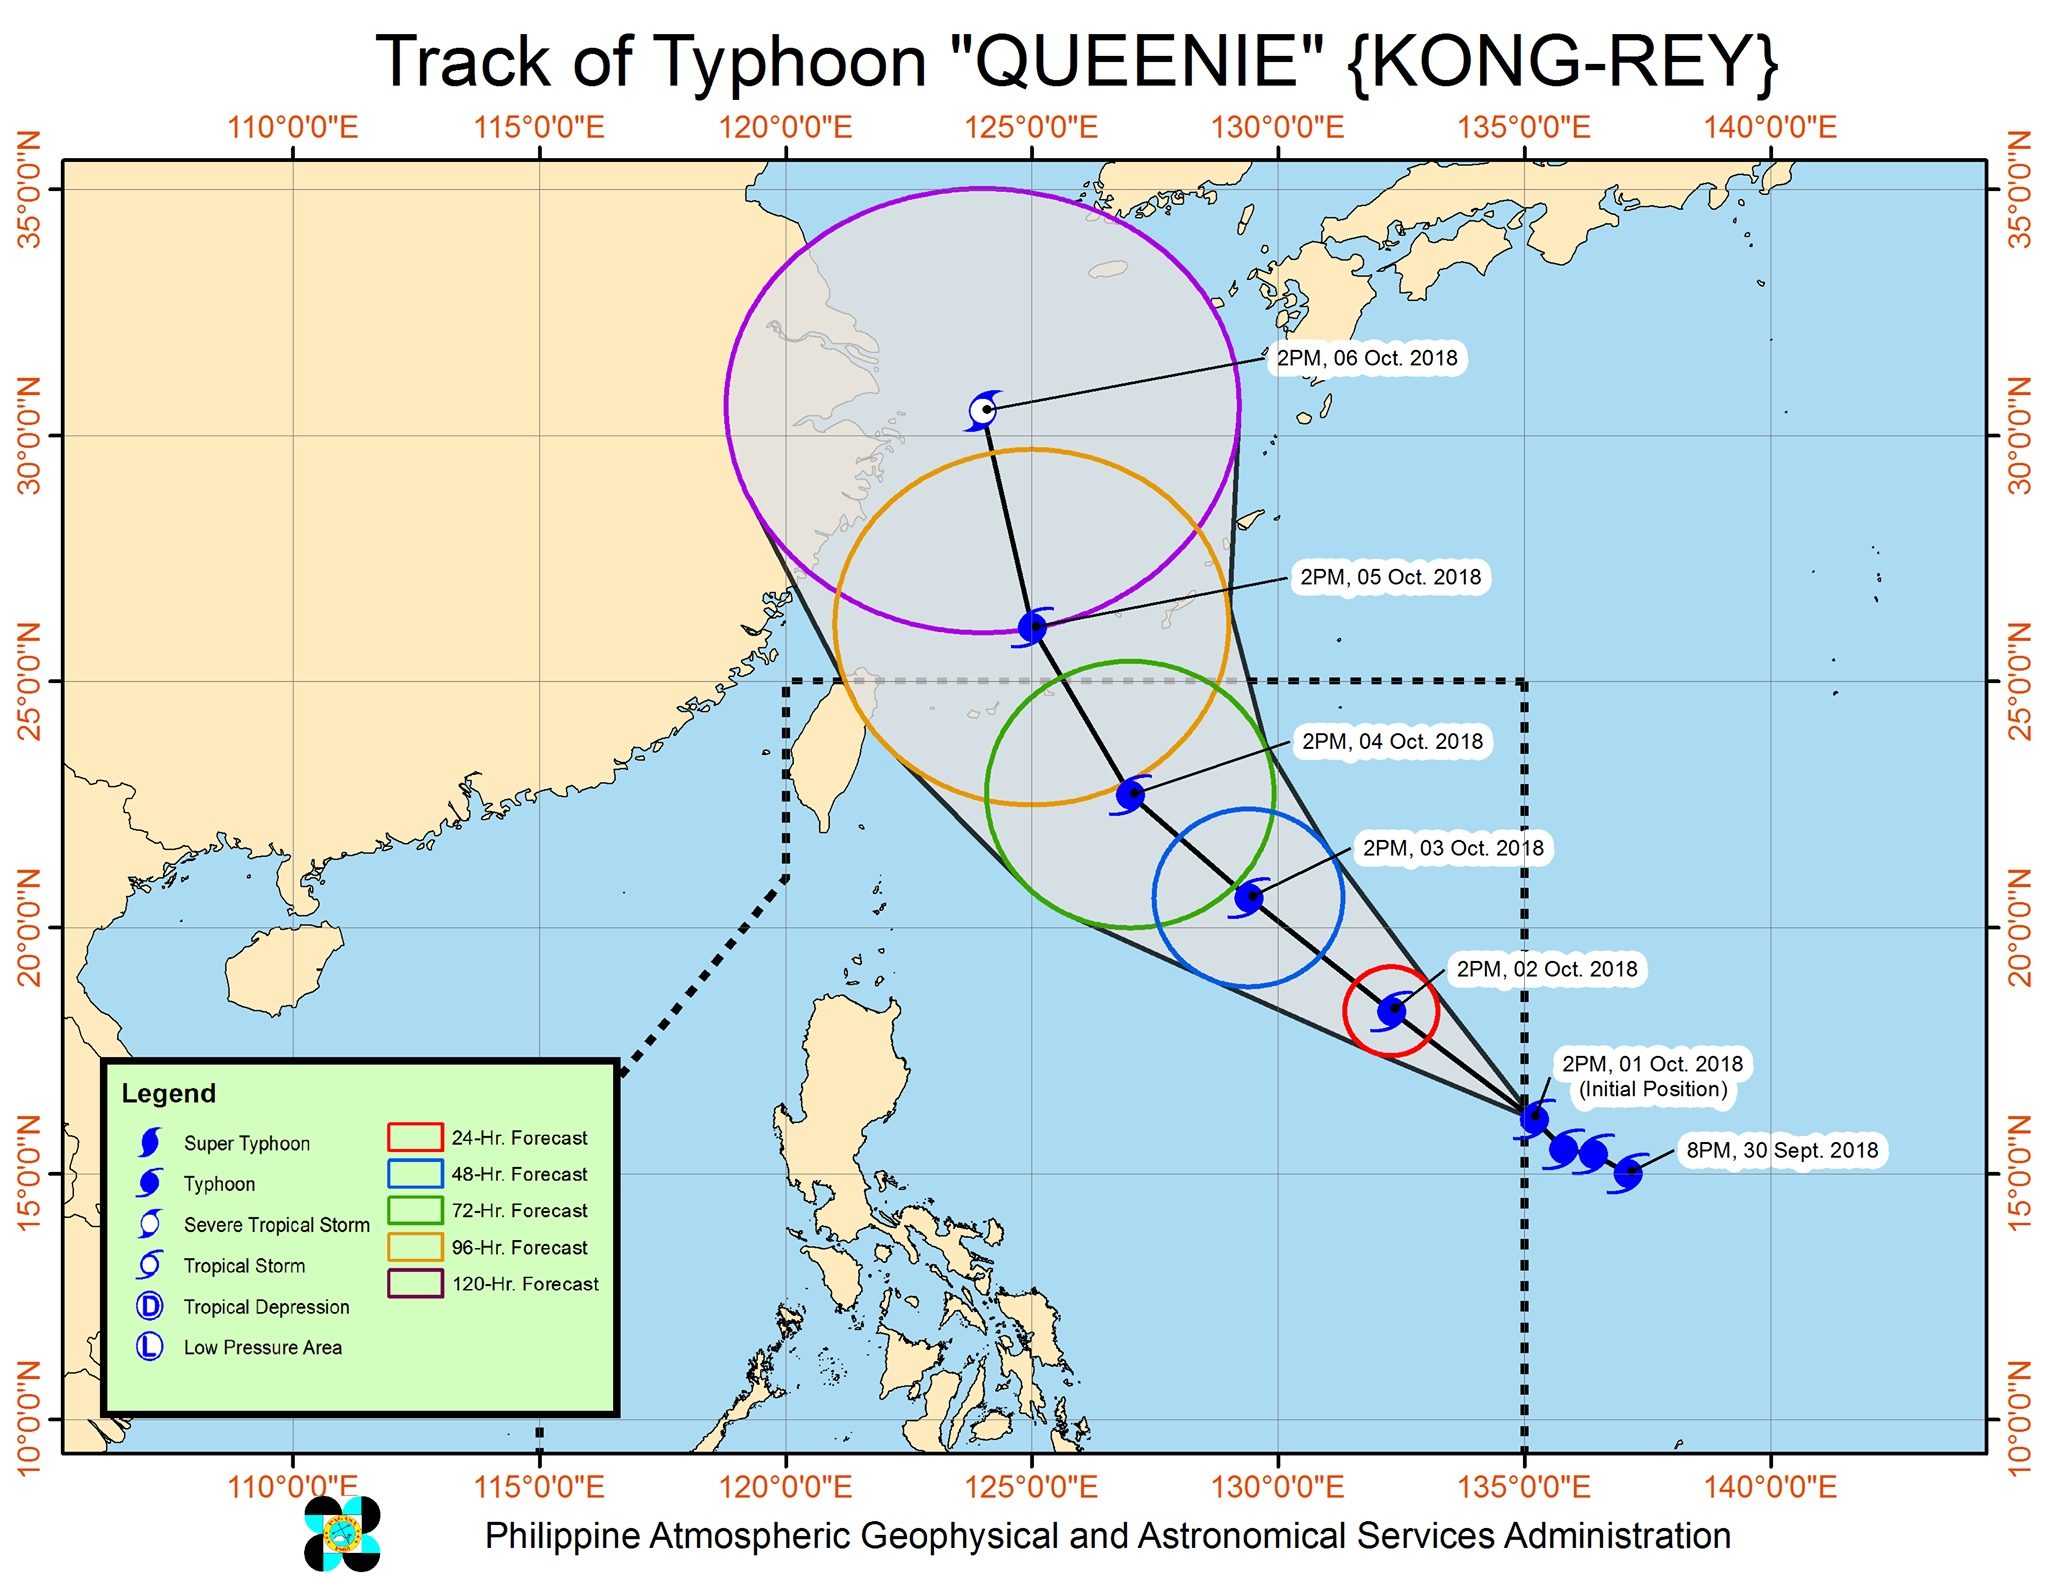 Forecast track of Typhoon Queenie (Kong-rey) as of October 1, 2018, 5 pm. Image from PAGASA 